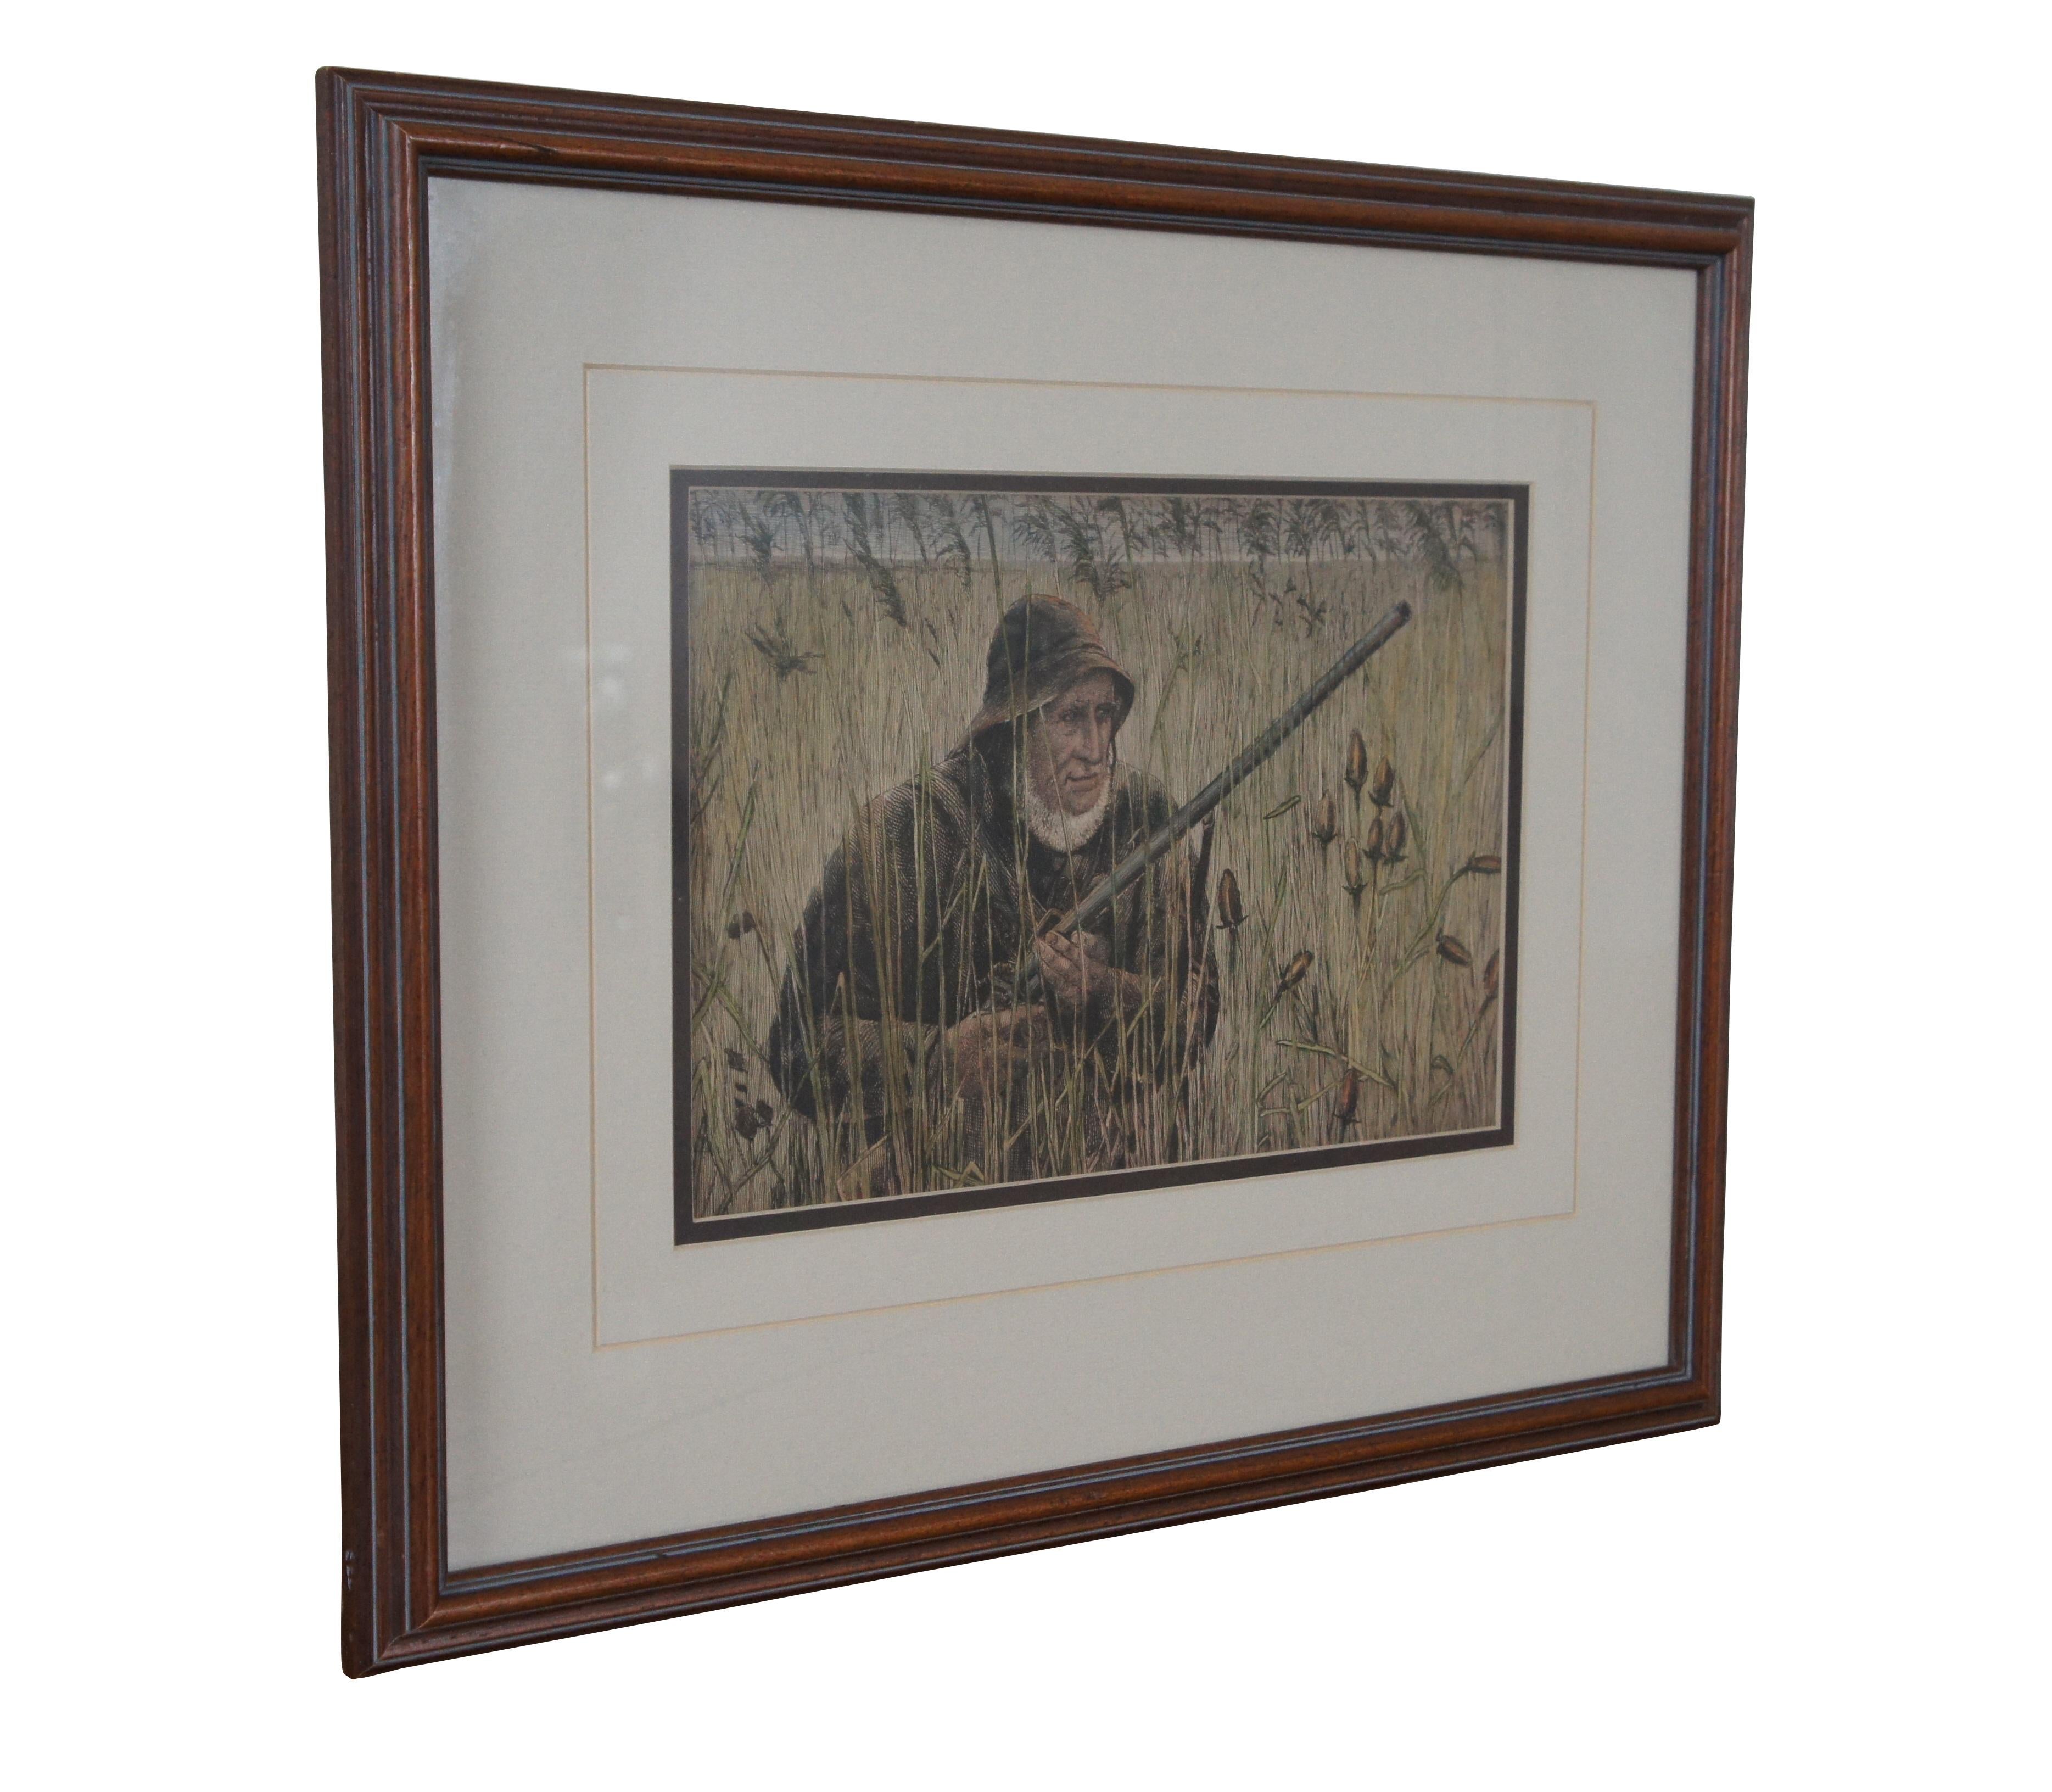 Antique Duck Hunter in the Field Hand Colored Landscape Engraving 20